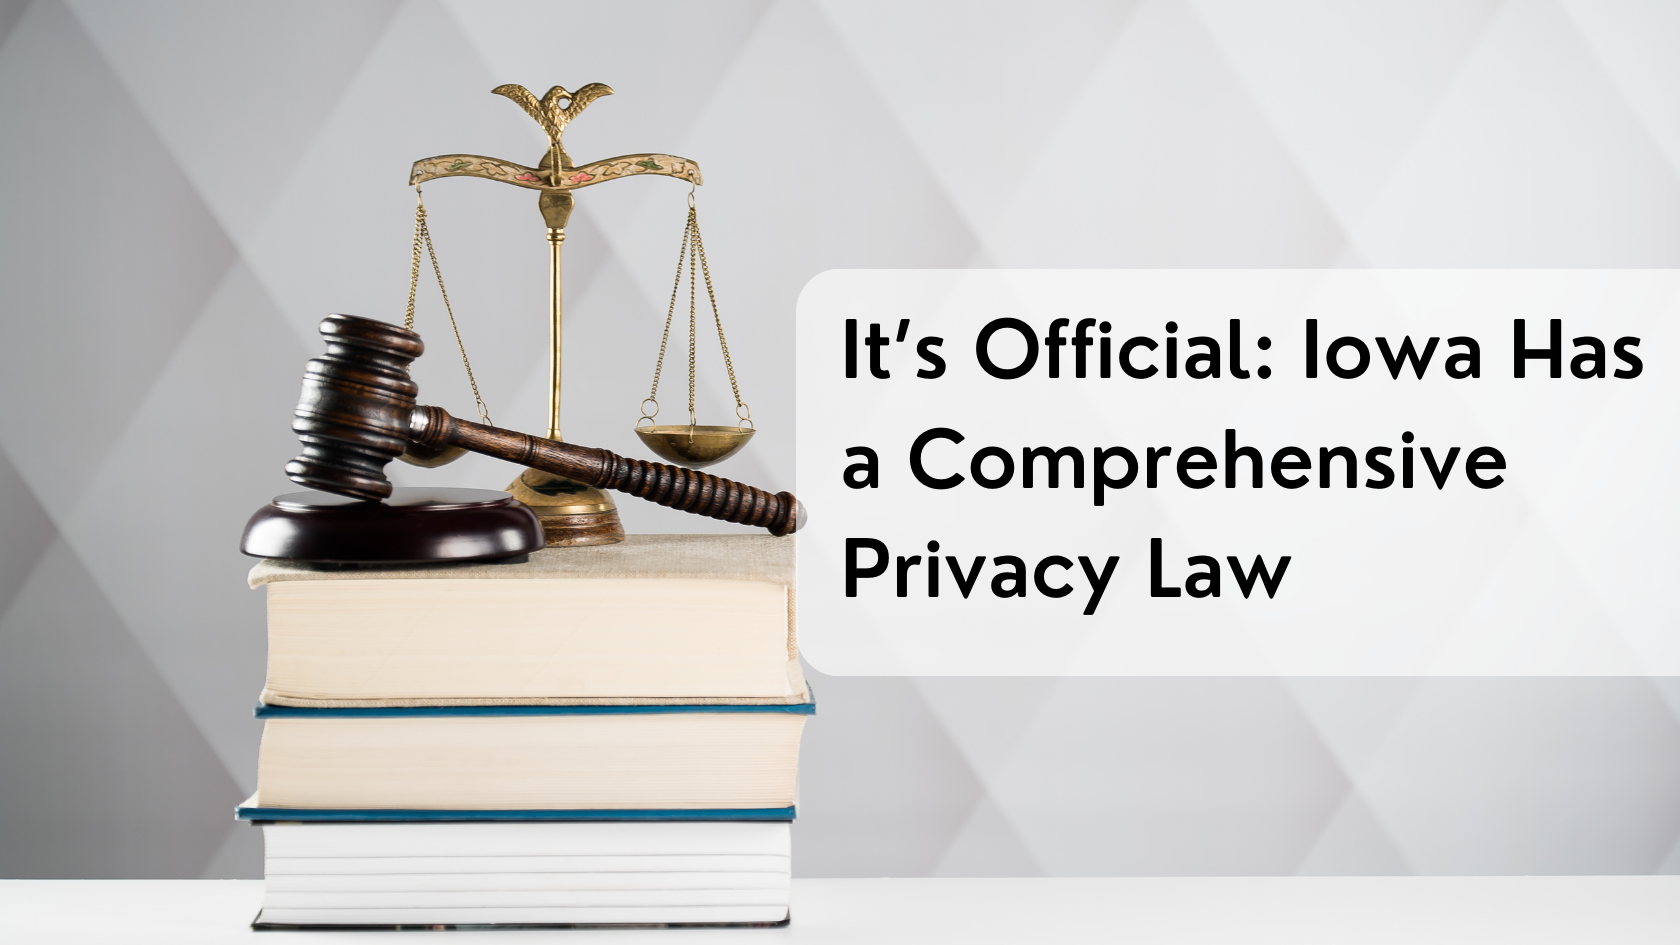 It’s Official: Iowa Has a Comprehensive Privacy Law